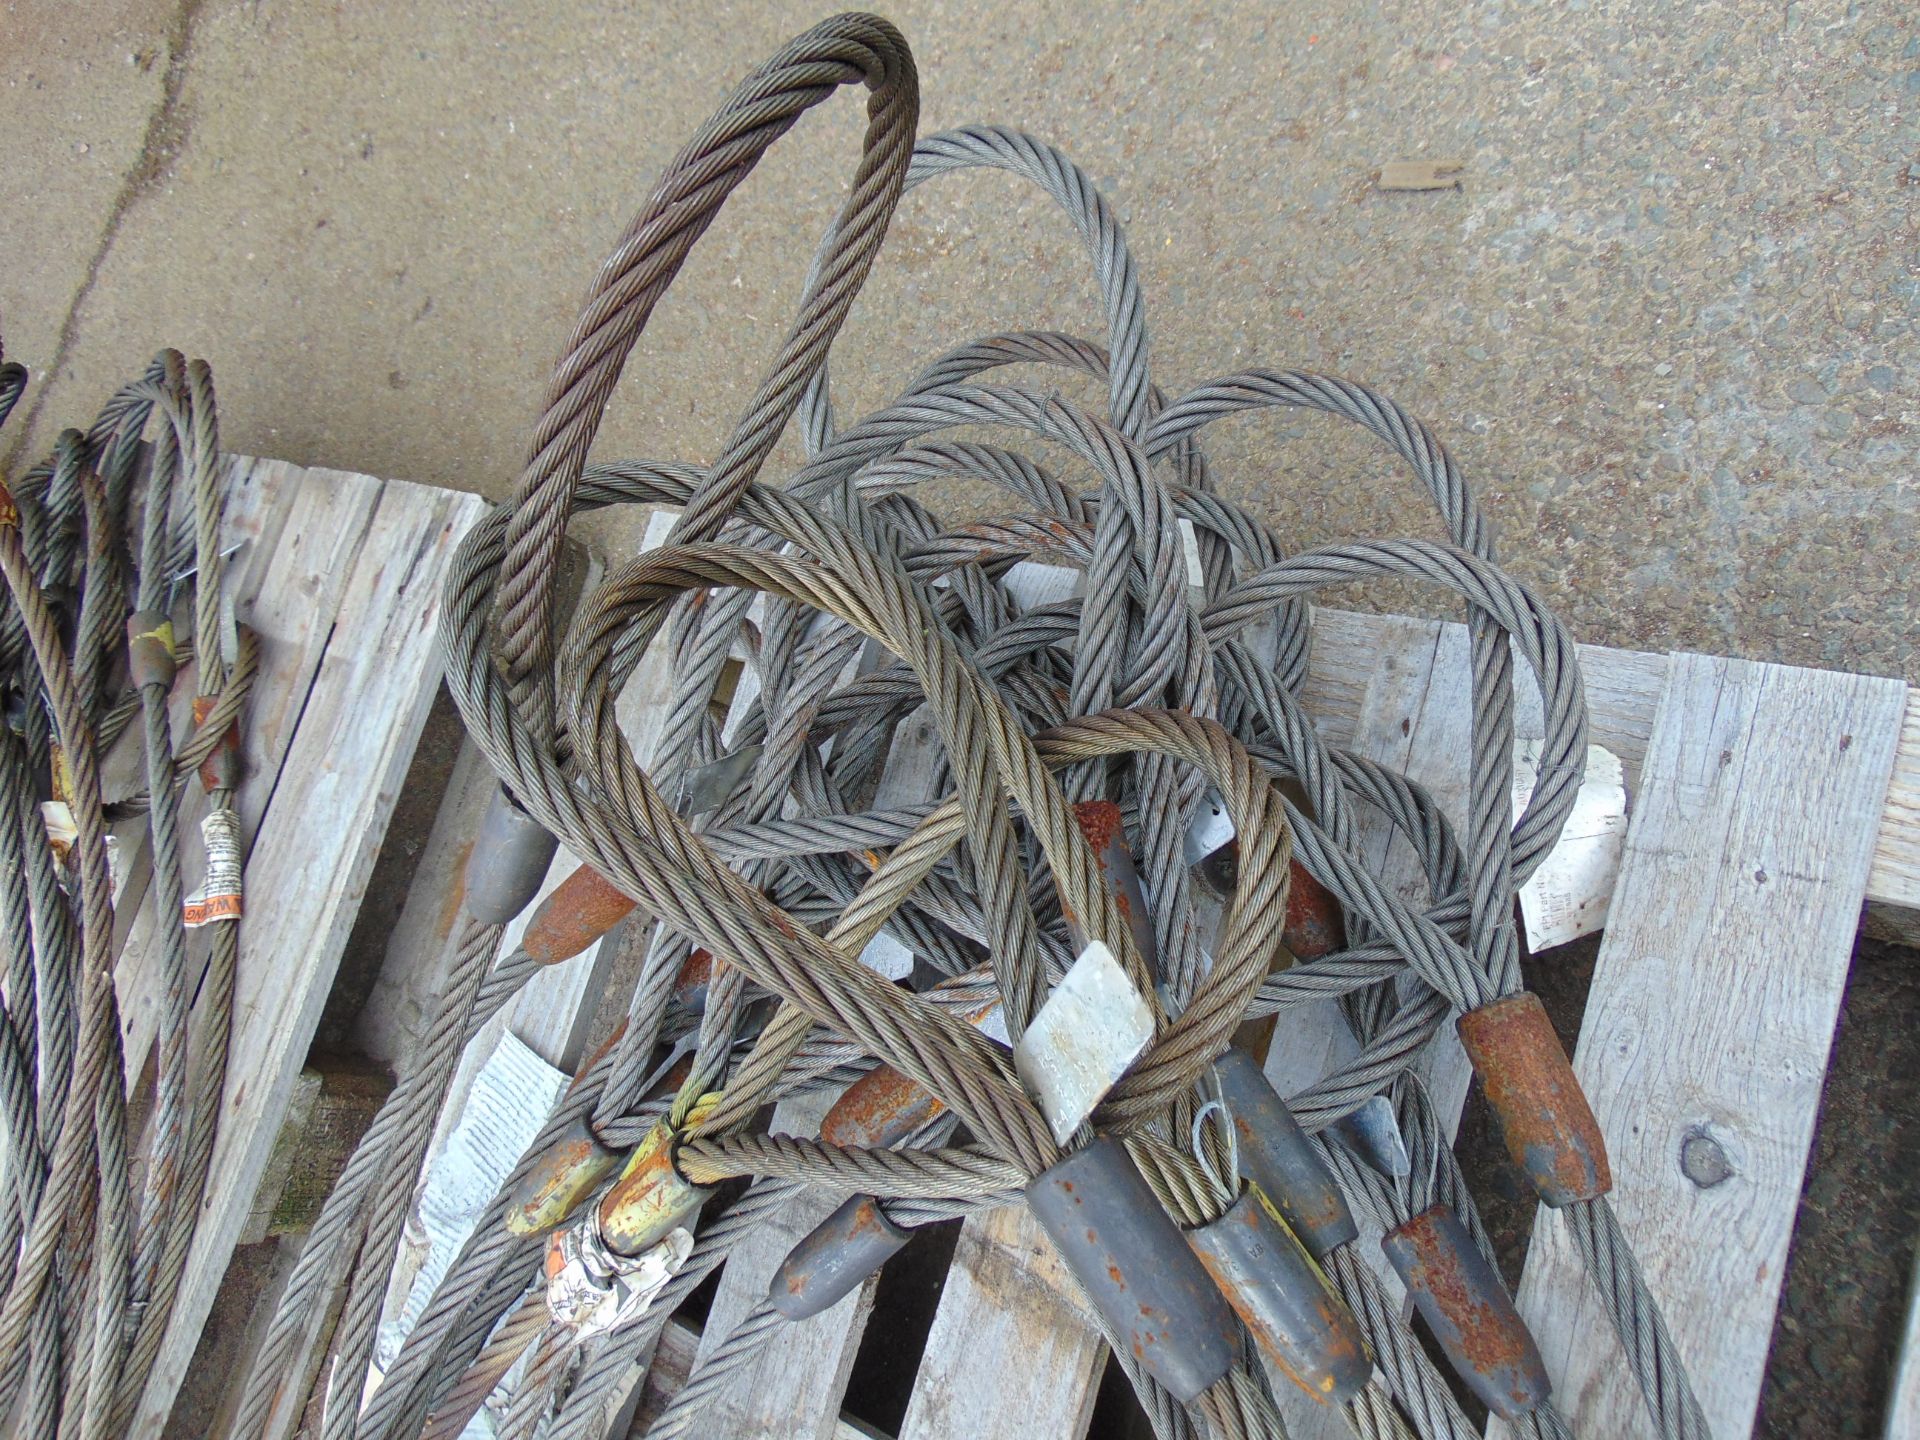 10 x Heavy Duty Recovery Wire Rope Slings - Image 2 of 3